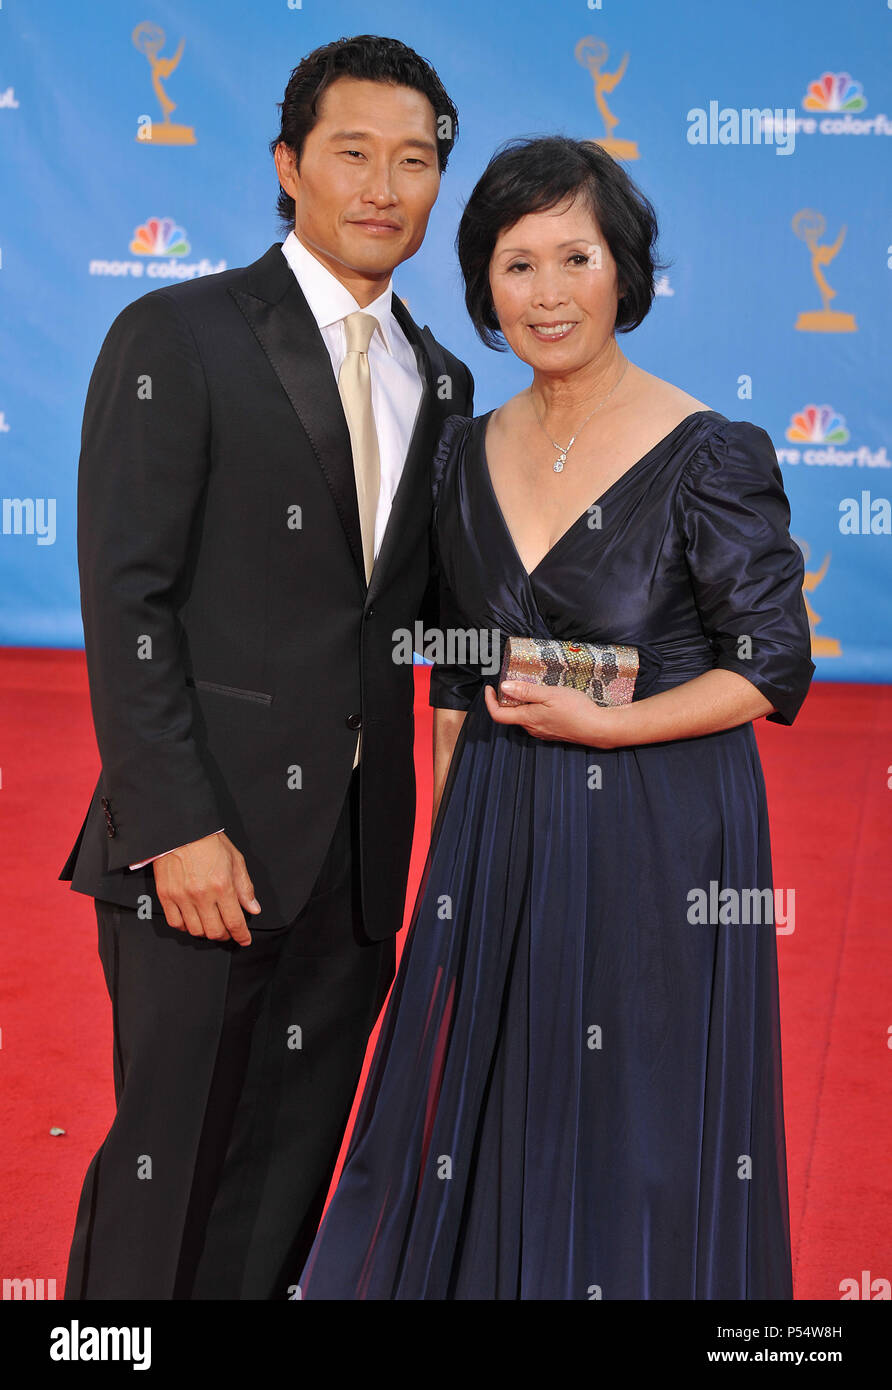 Daniel Dae Kim And Wife High Resolution Stock Photography and Images